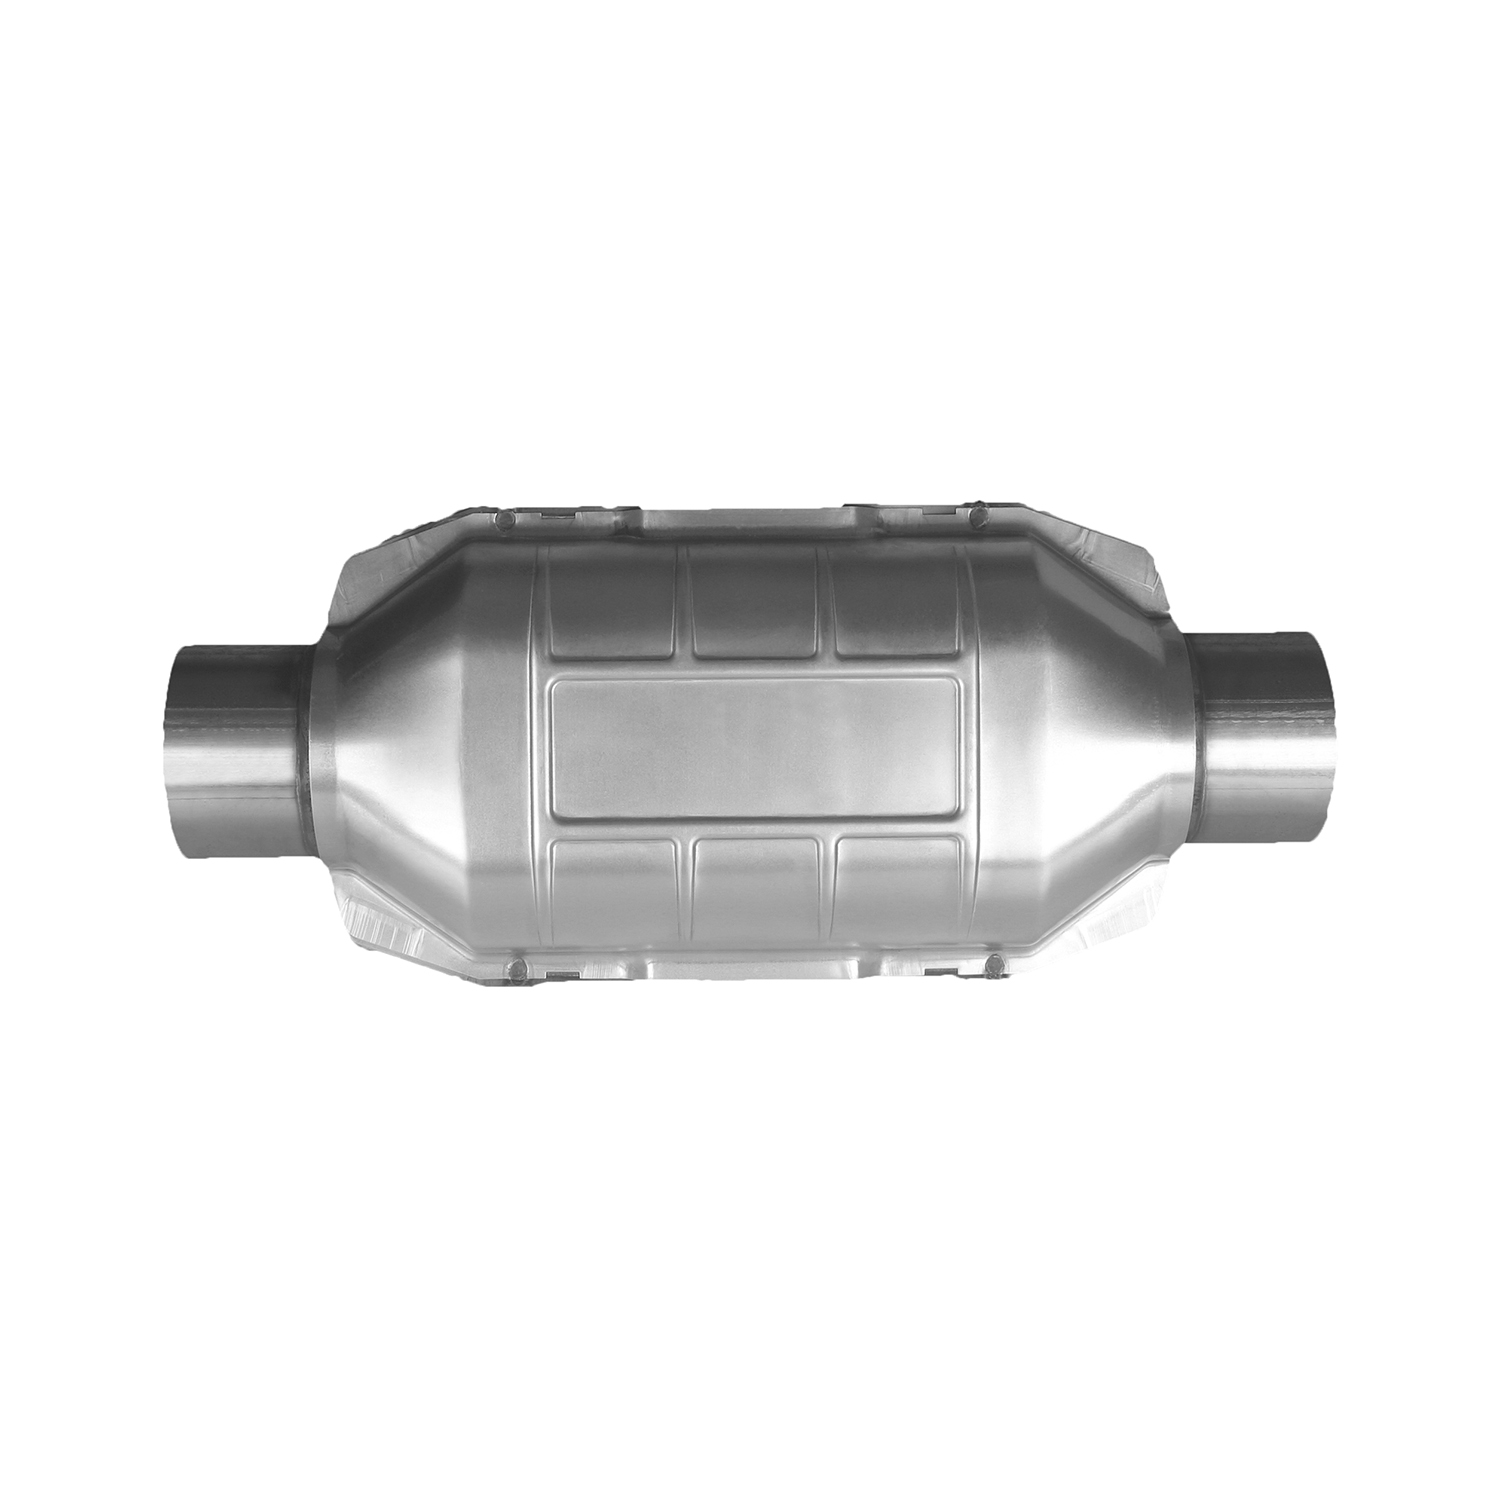 Picture of AP Exhaust 602205 Federal / Epa Catalytic Converter - Universal Pre-Obdii Standard Duty